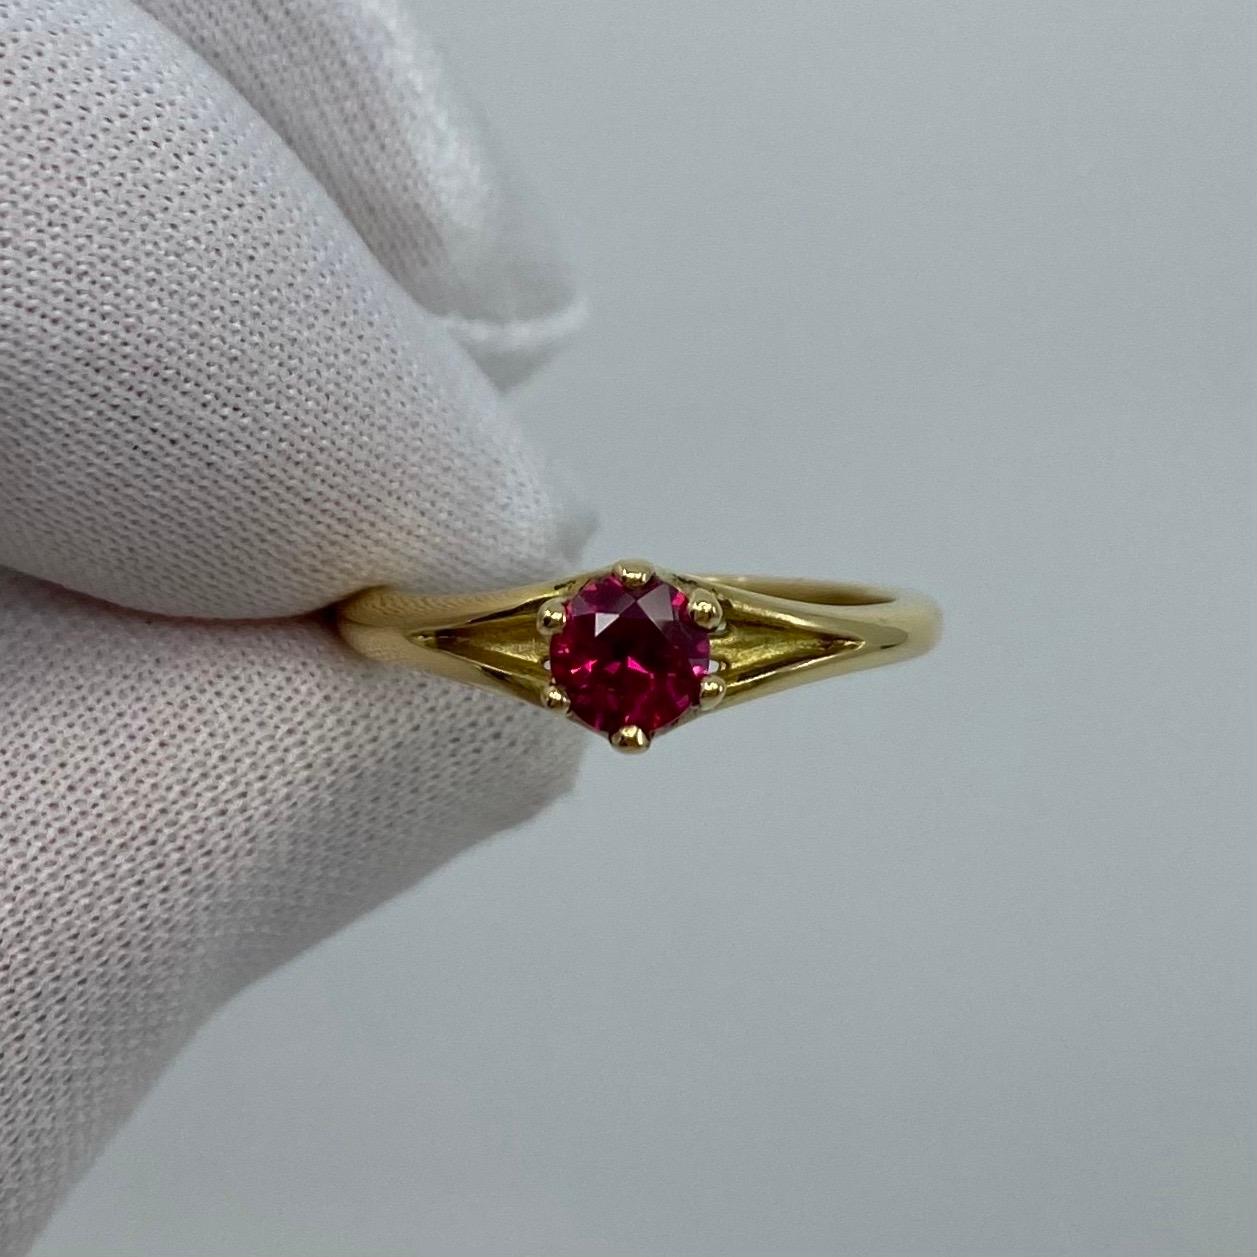 Fine Deep Red Emerald 18 Karat Yellow Gold Solitaire Ring.

Stunning 0.65 Carat centre ruby with a fine deep but vivid red colour and a very good round brilliant cut. Also has very good clarity with only some small natural inclusions visible when